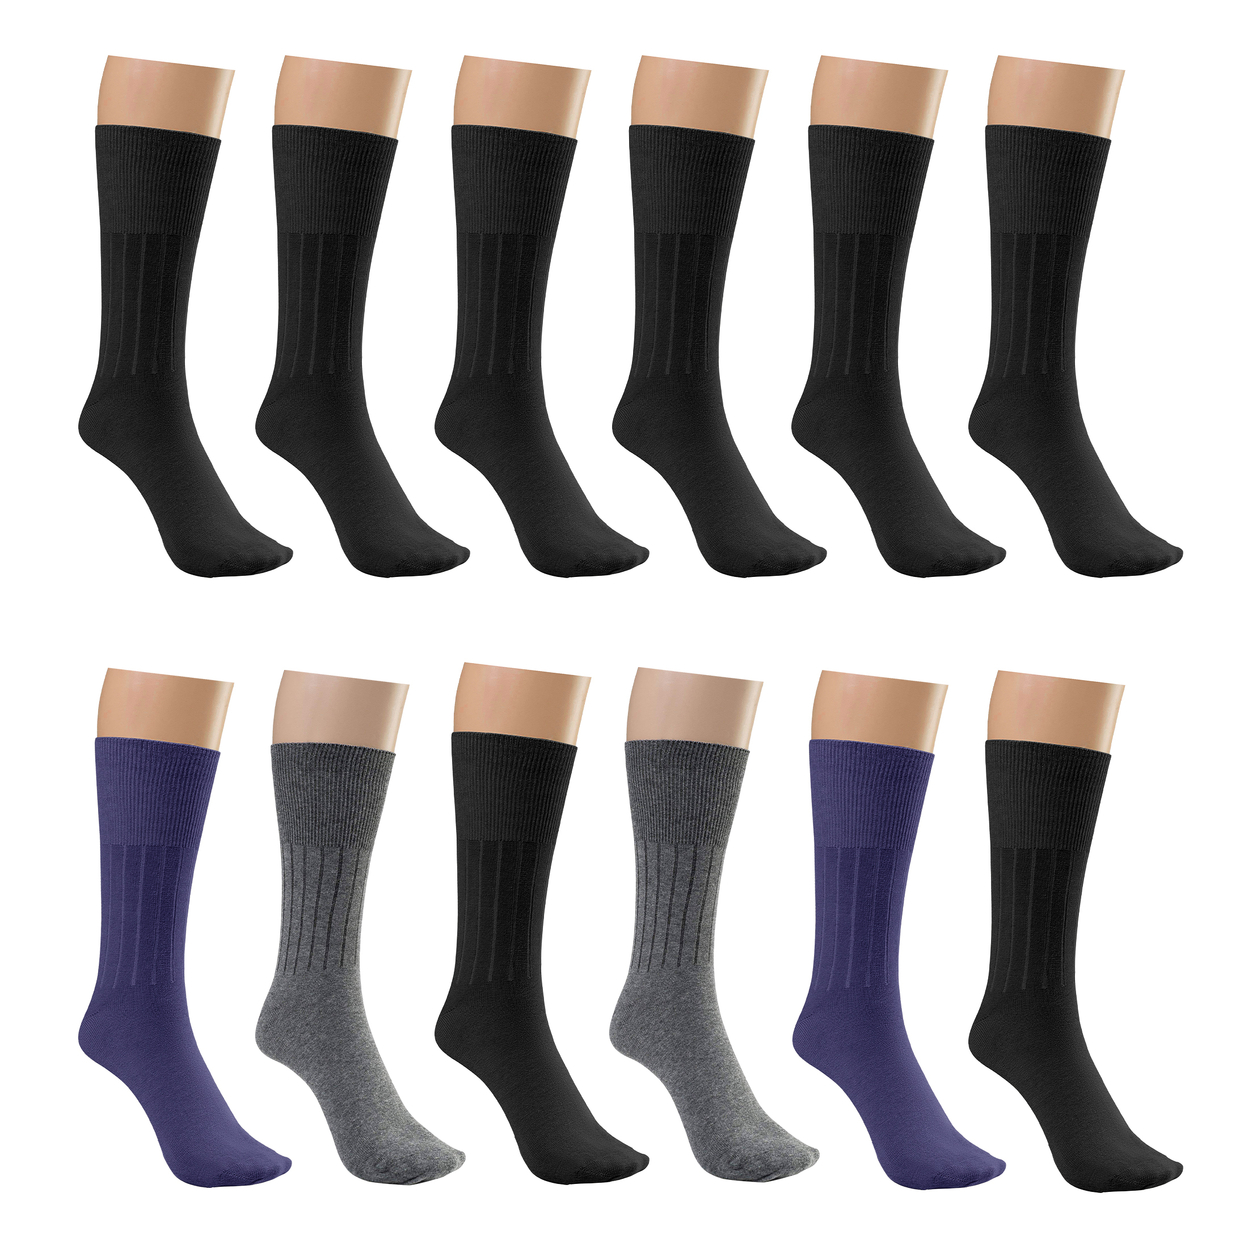 6-Pairs: Physician Approved Non-Binding Diabetic Circulatory Comfortable Moisture Wicking Dress Socks - Black